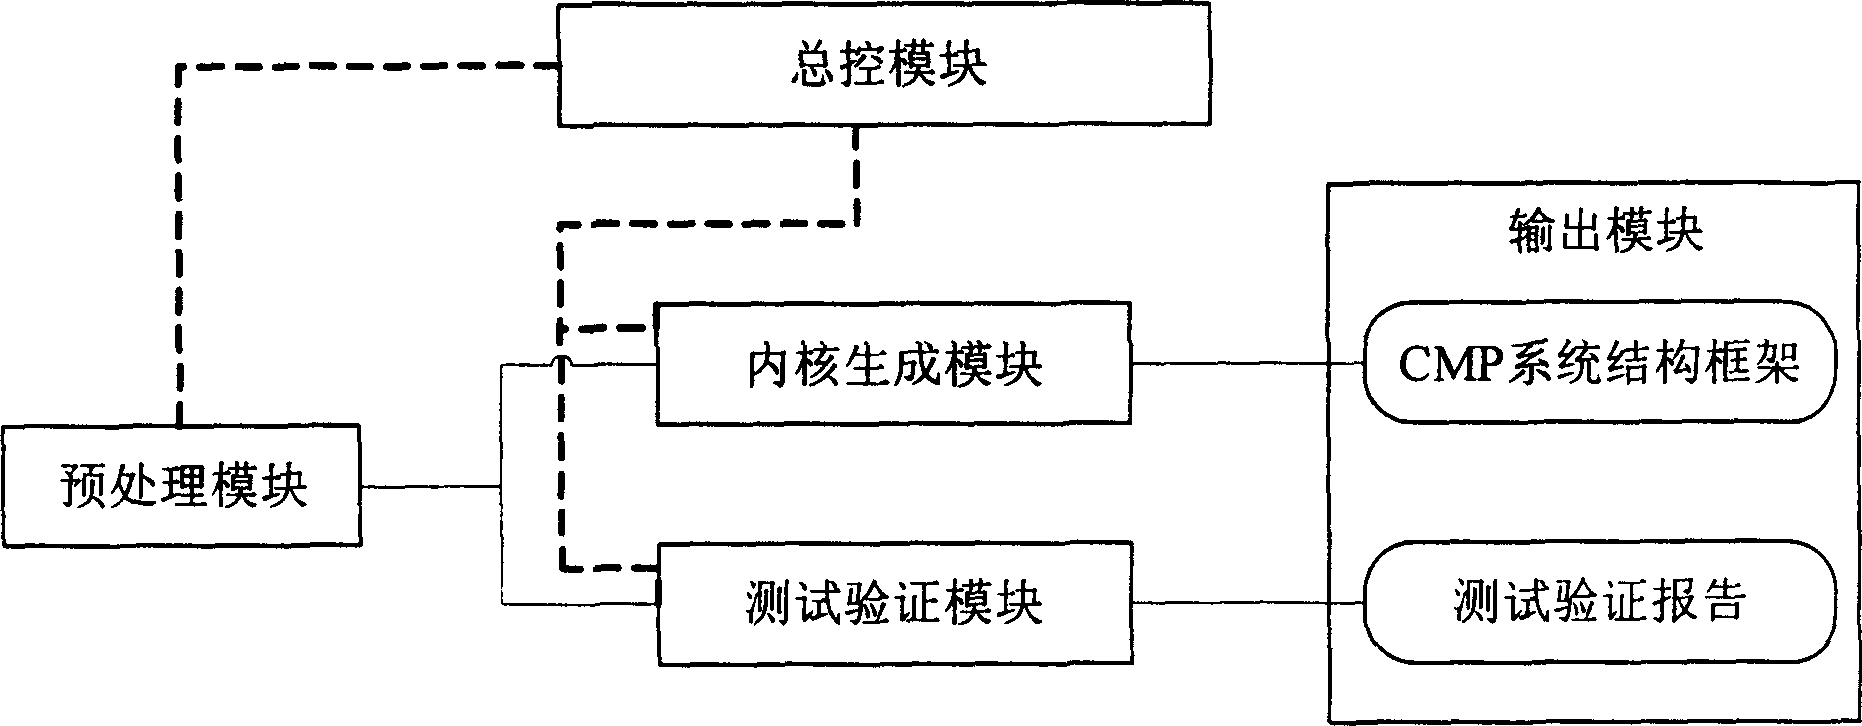 Single-chip analog system with multi-processor structure